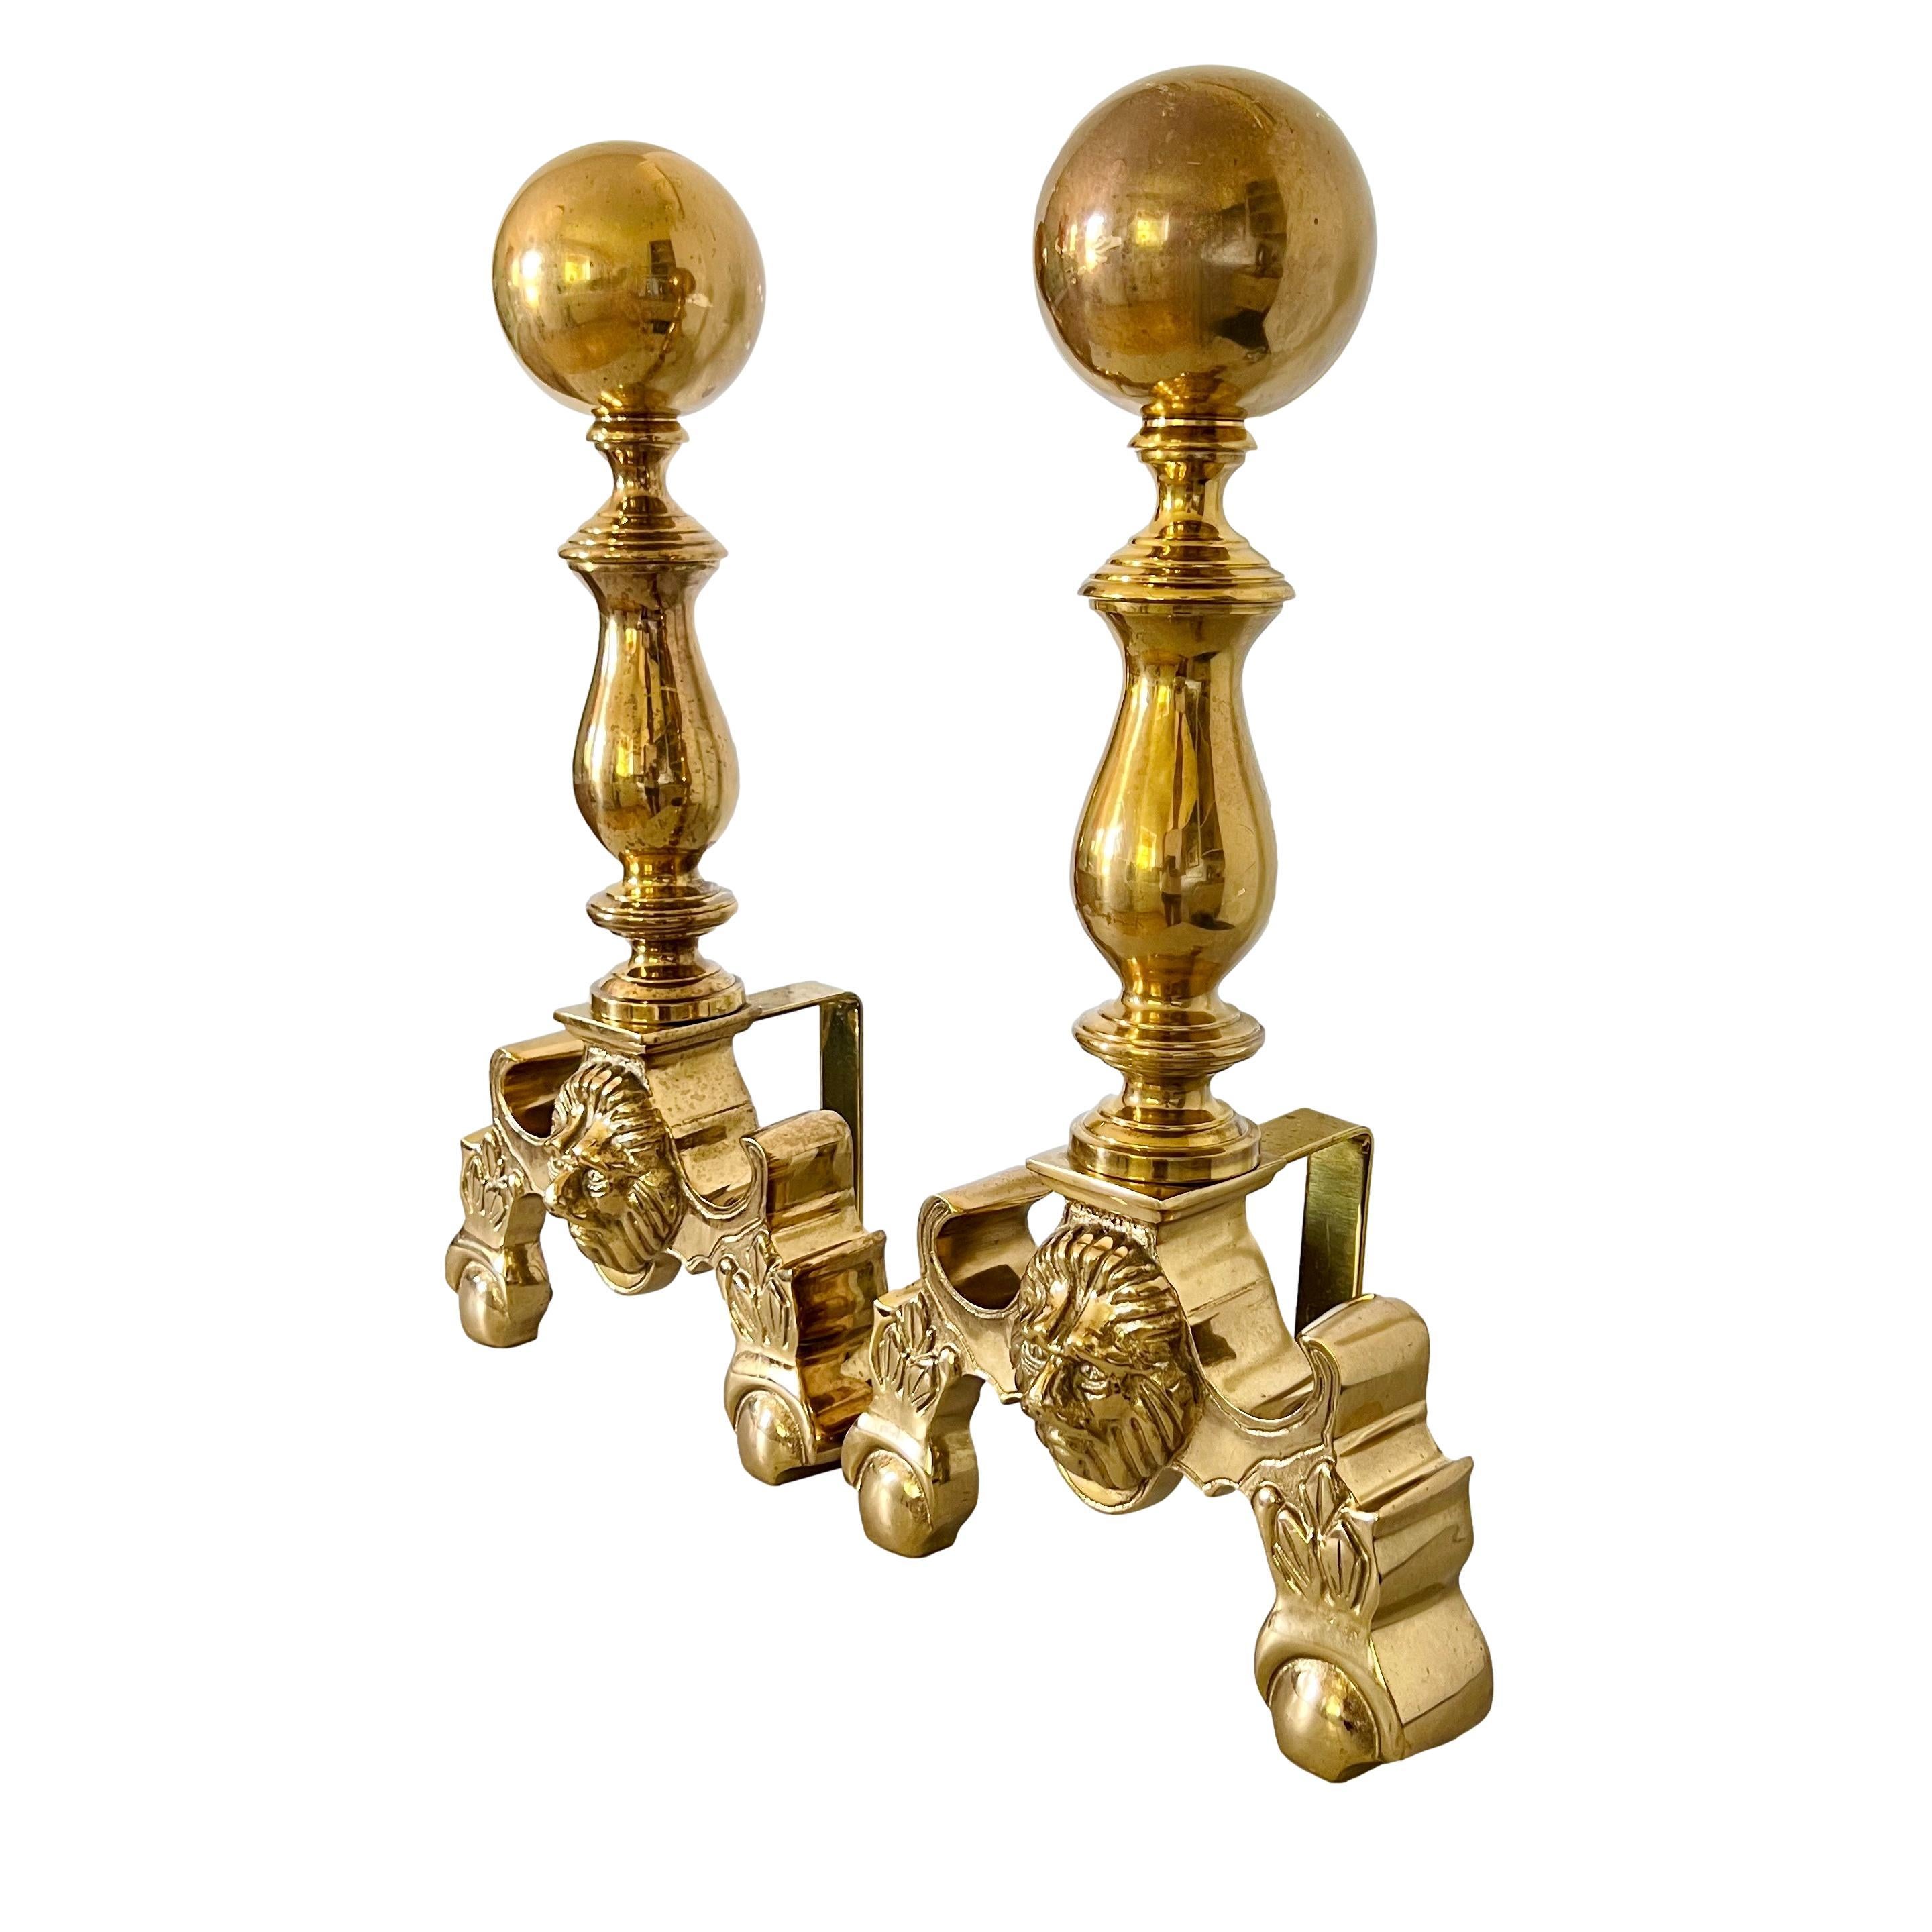 American Mid 20th Century French Empire Brass Cannonball Chenets Andirons, a Pair For Sale